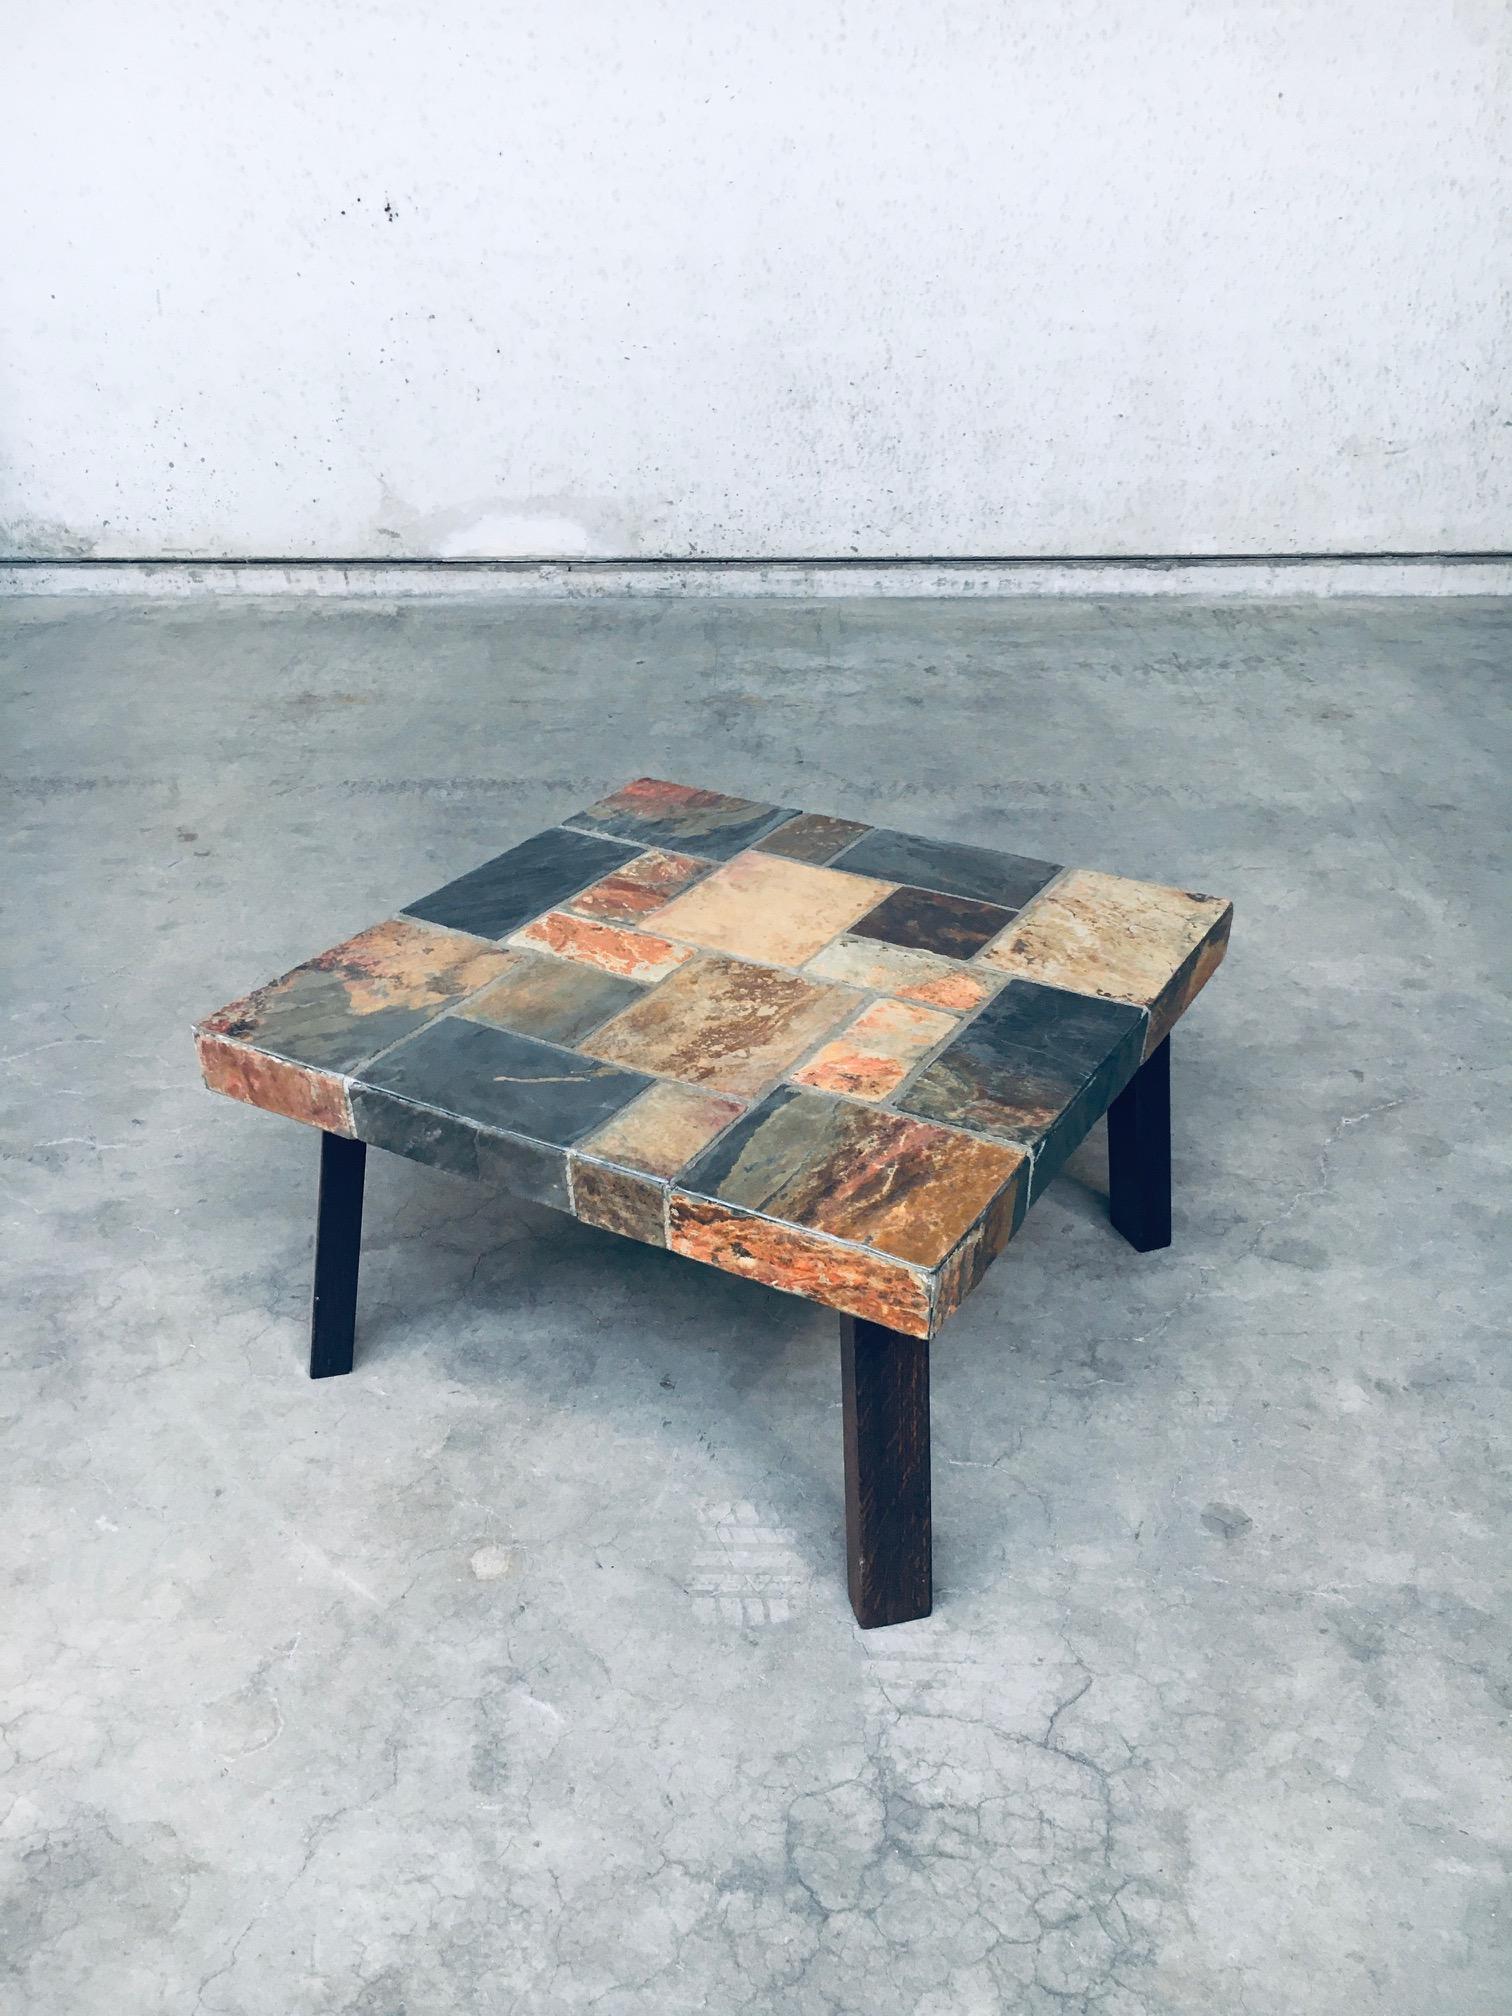 Vintage Brutalist in Style Design Slate Stone top Coffee Table. Made in Belgium, 1970's. Slate tiles stone mosaic top on 4 oak wooden legs. Slates are in different colors which makes this very appealing. Minimal in design. This comes in very good